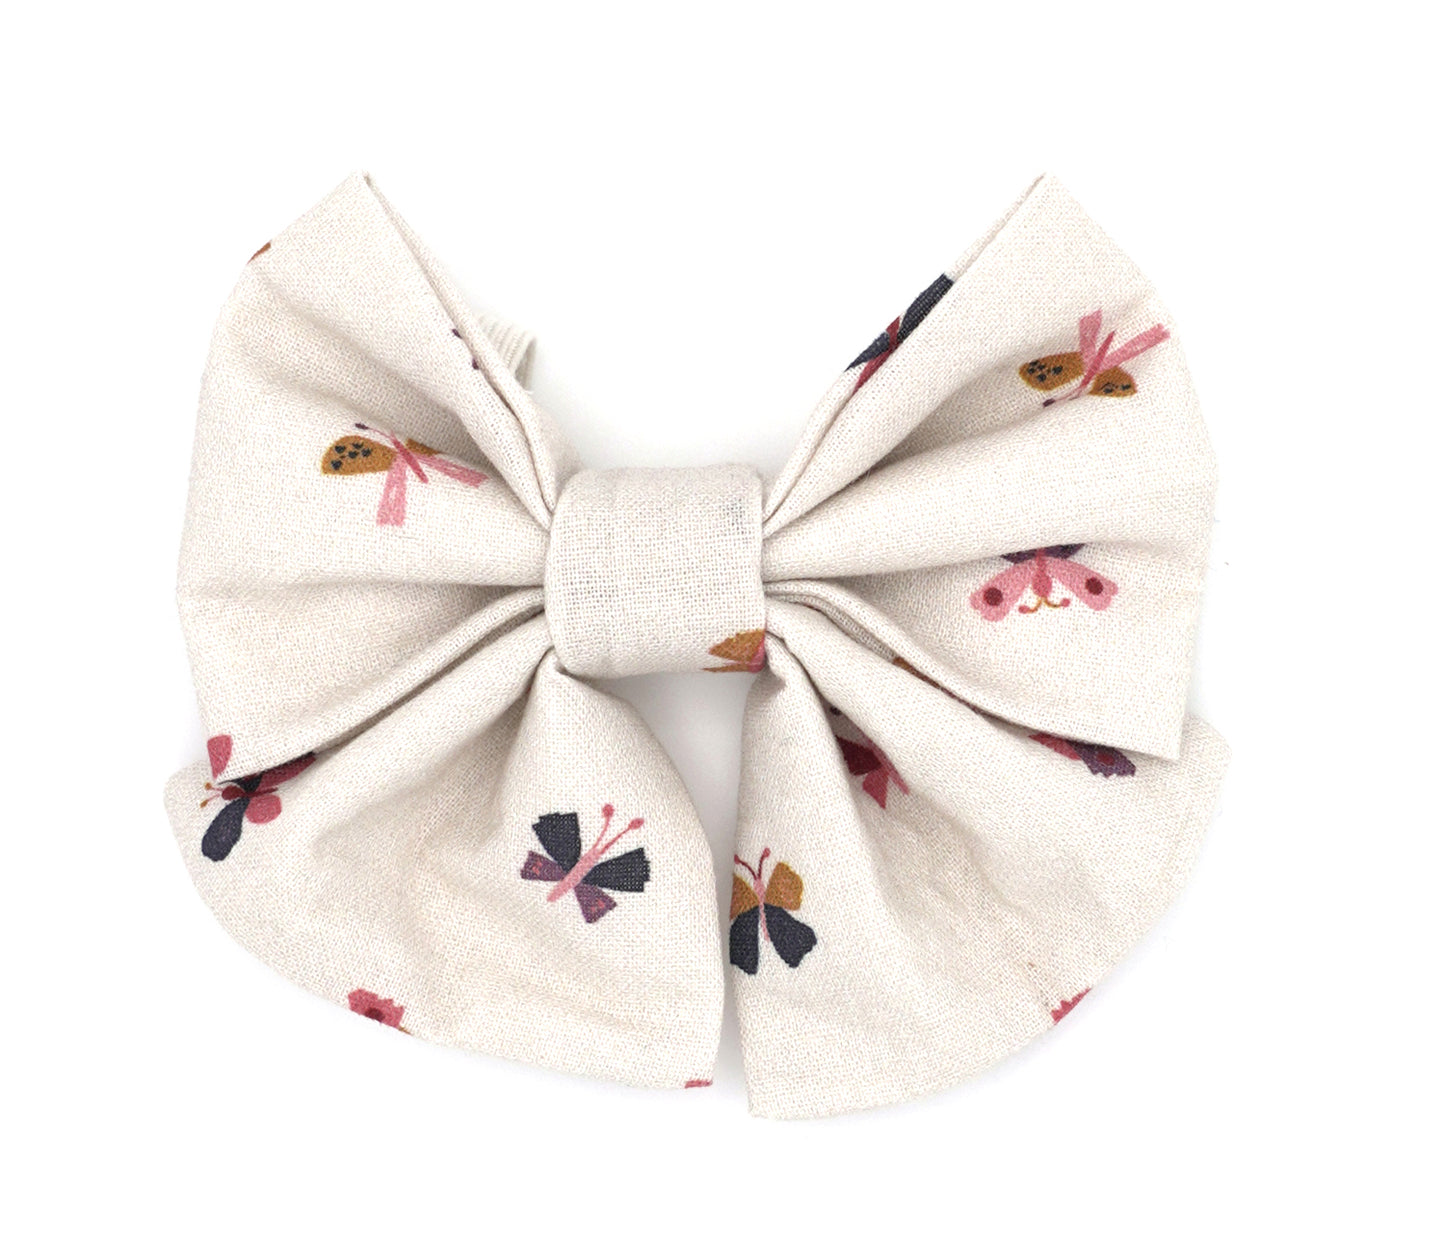 Handmade cotton bow tie with tails for dogs (or other pets). Elastic straps on back with snaps make it easy to add to collar, harness, or leash. Cream background with geometric shaped butterflies in light pink, gold, maroon, purple and navy.